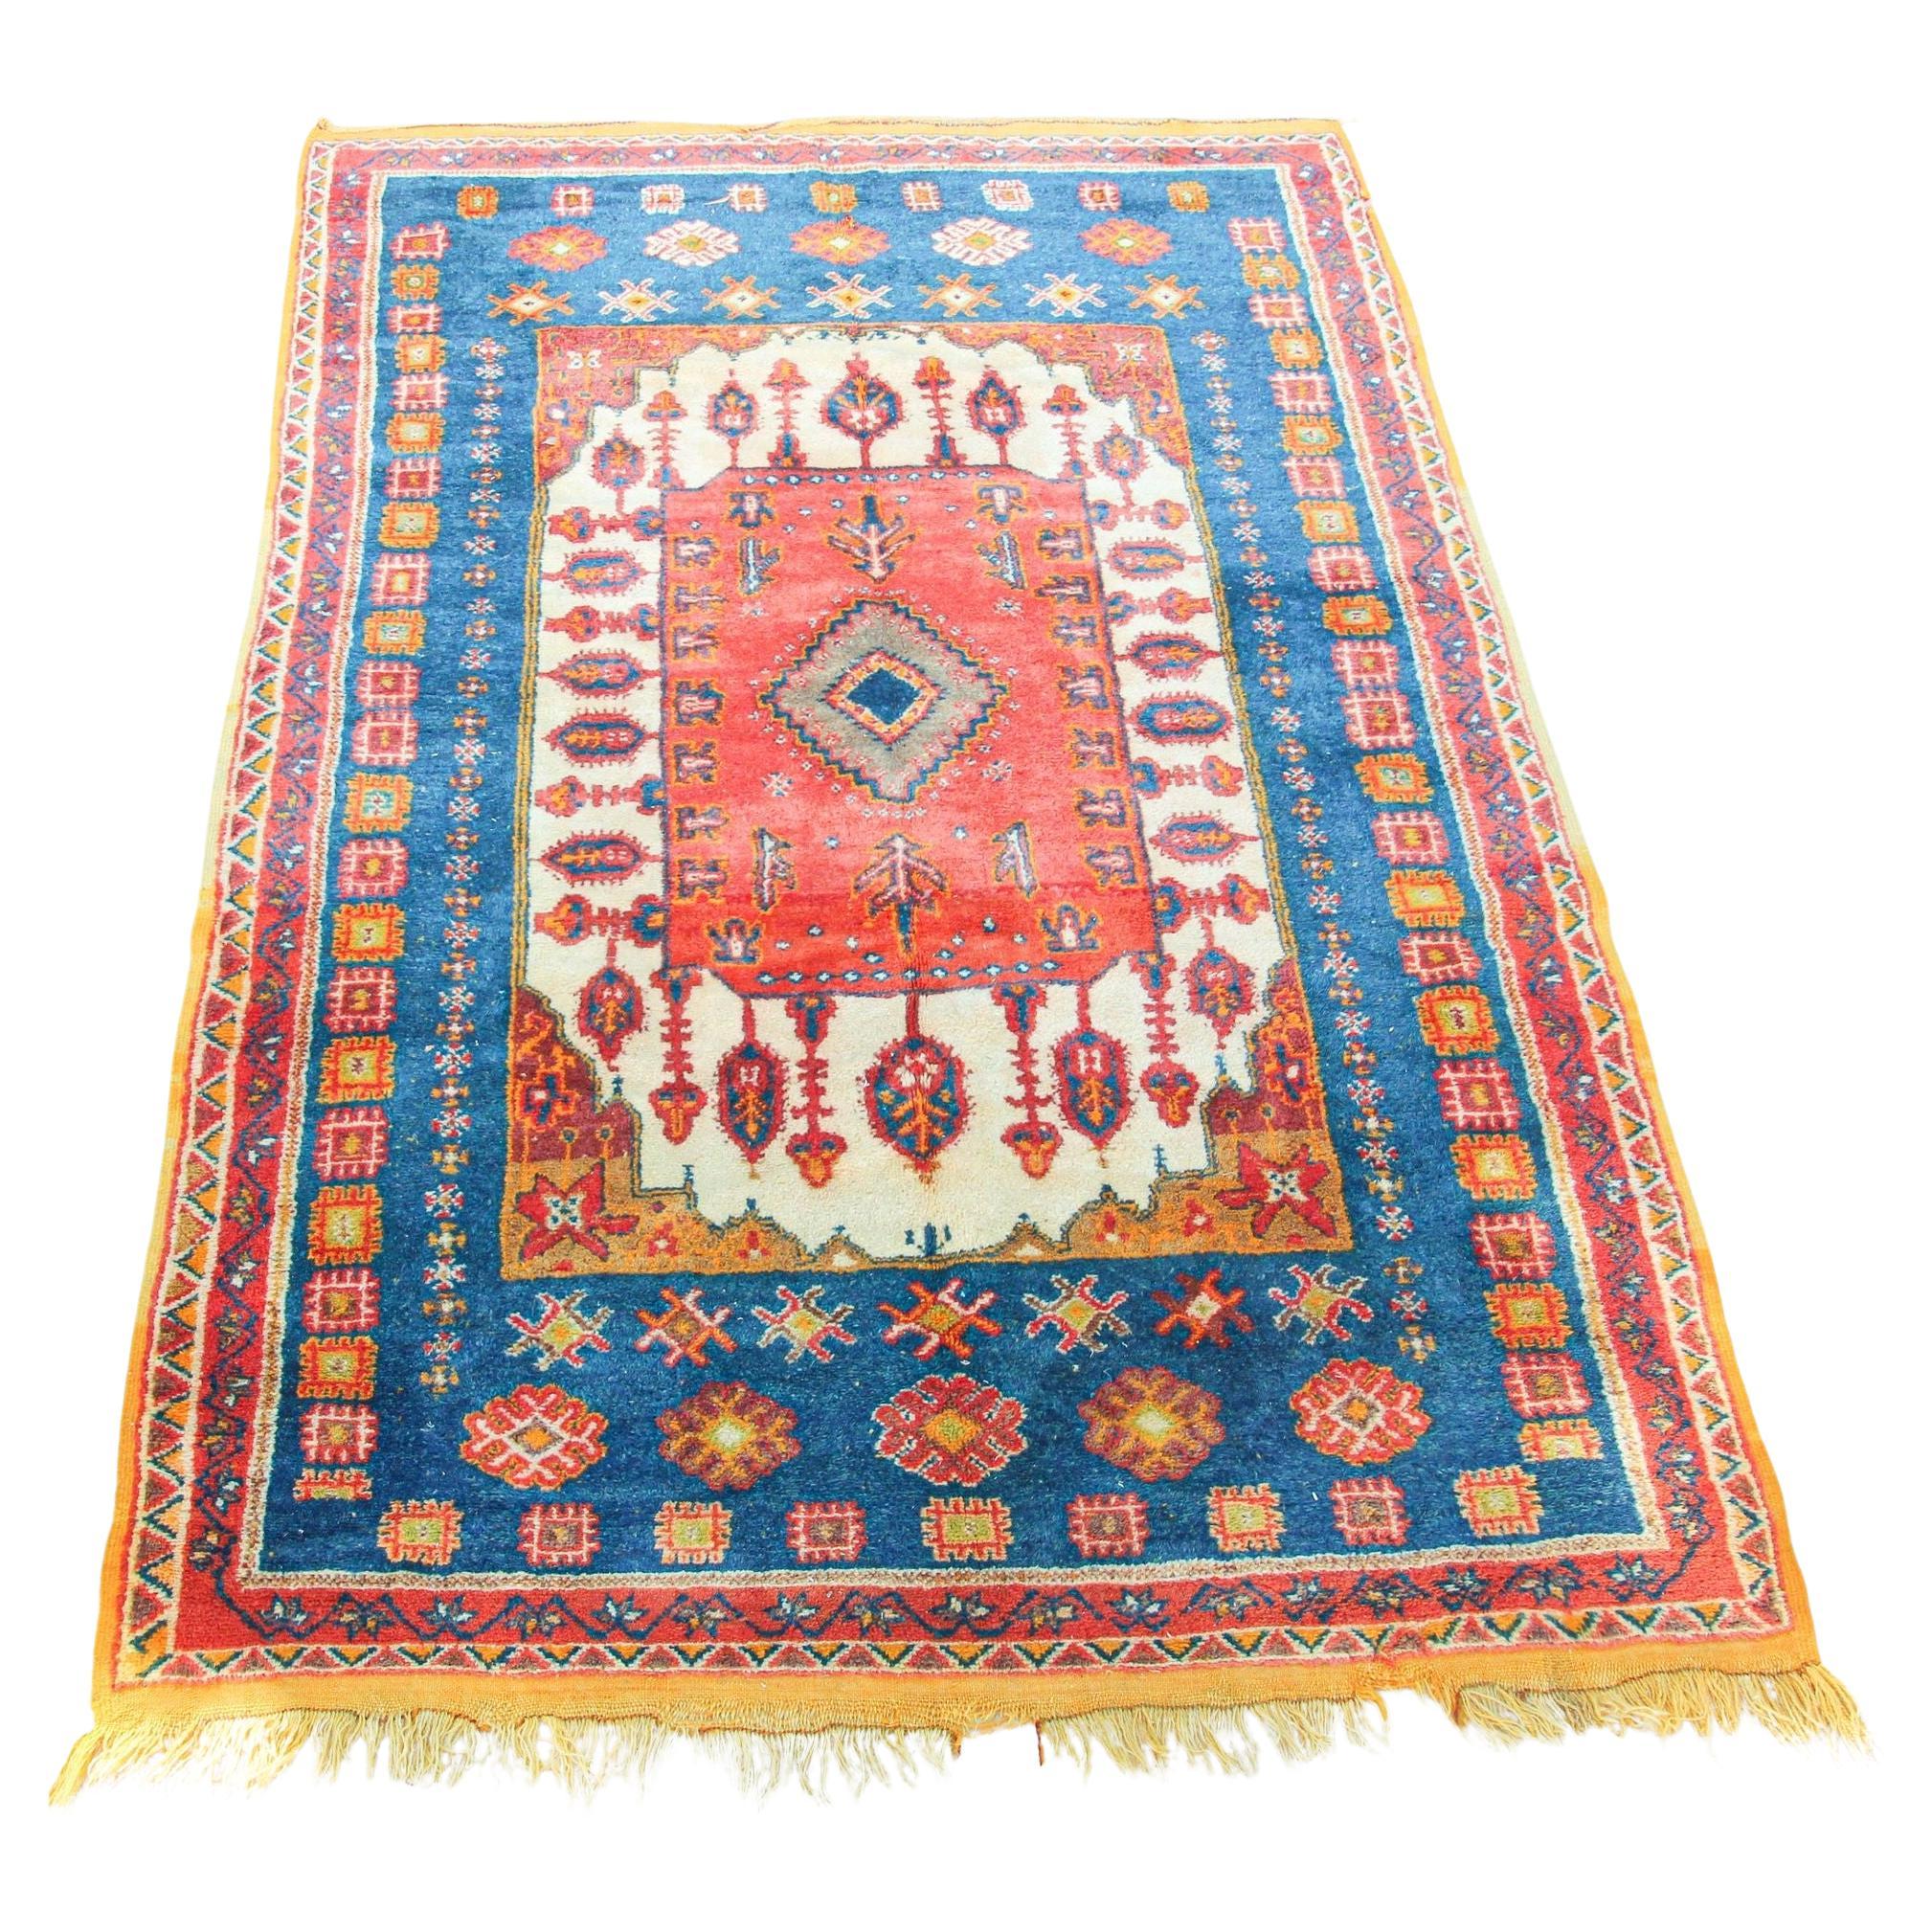 1960s Moroccan Berber Rug in Royal Blue, Pink and Orange Colors For Sale